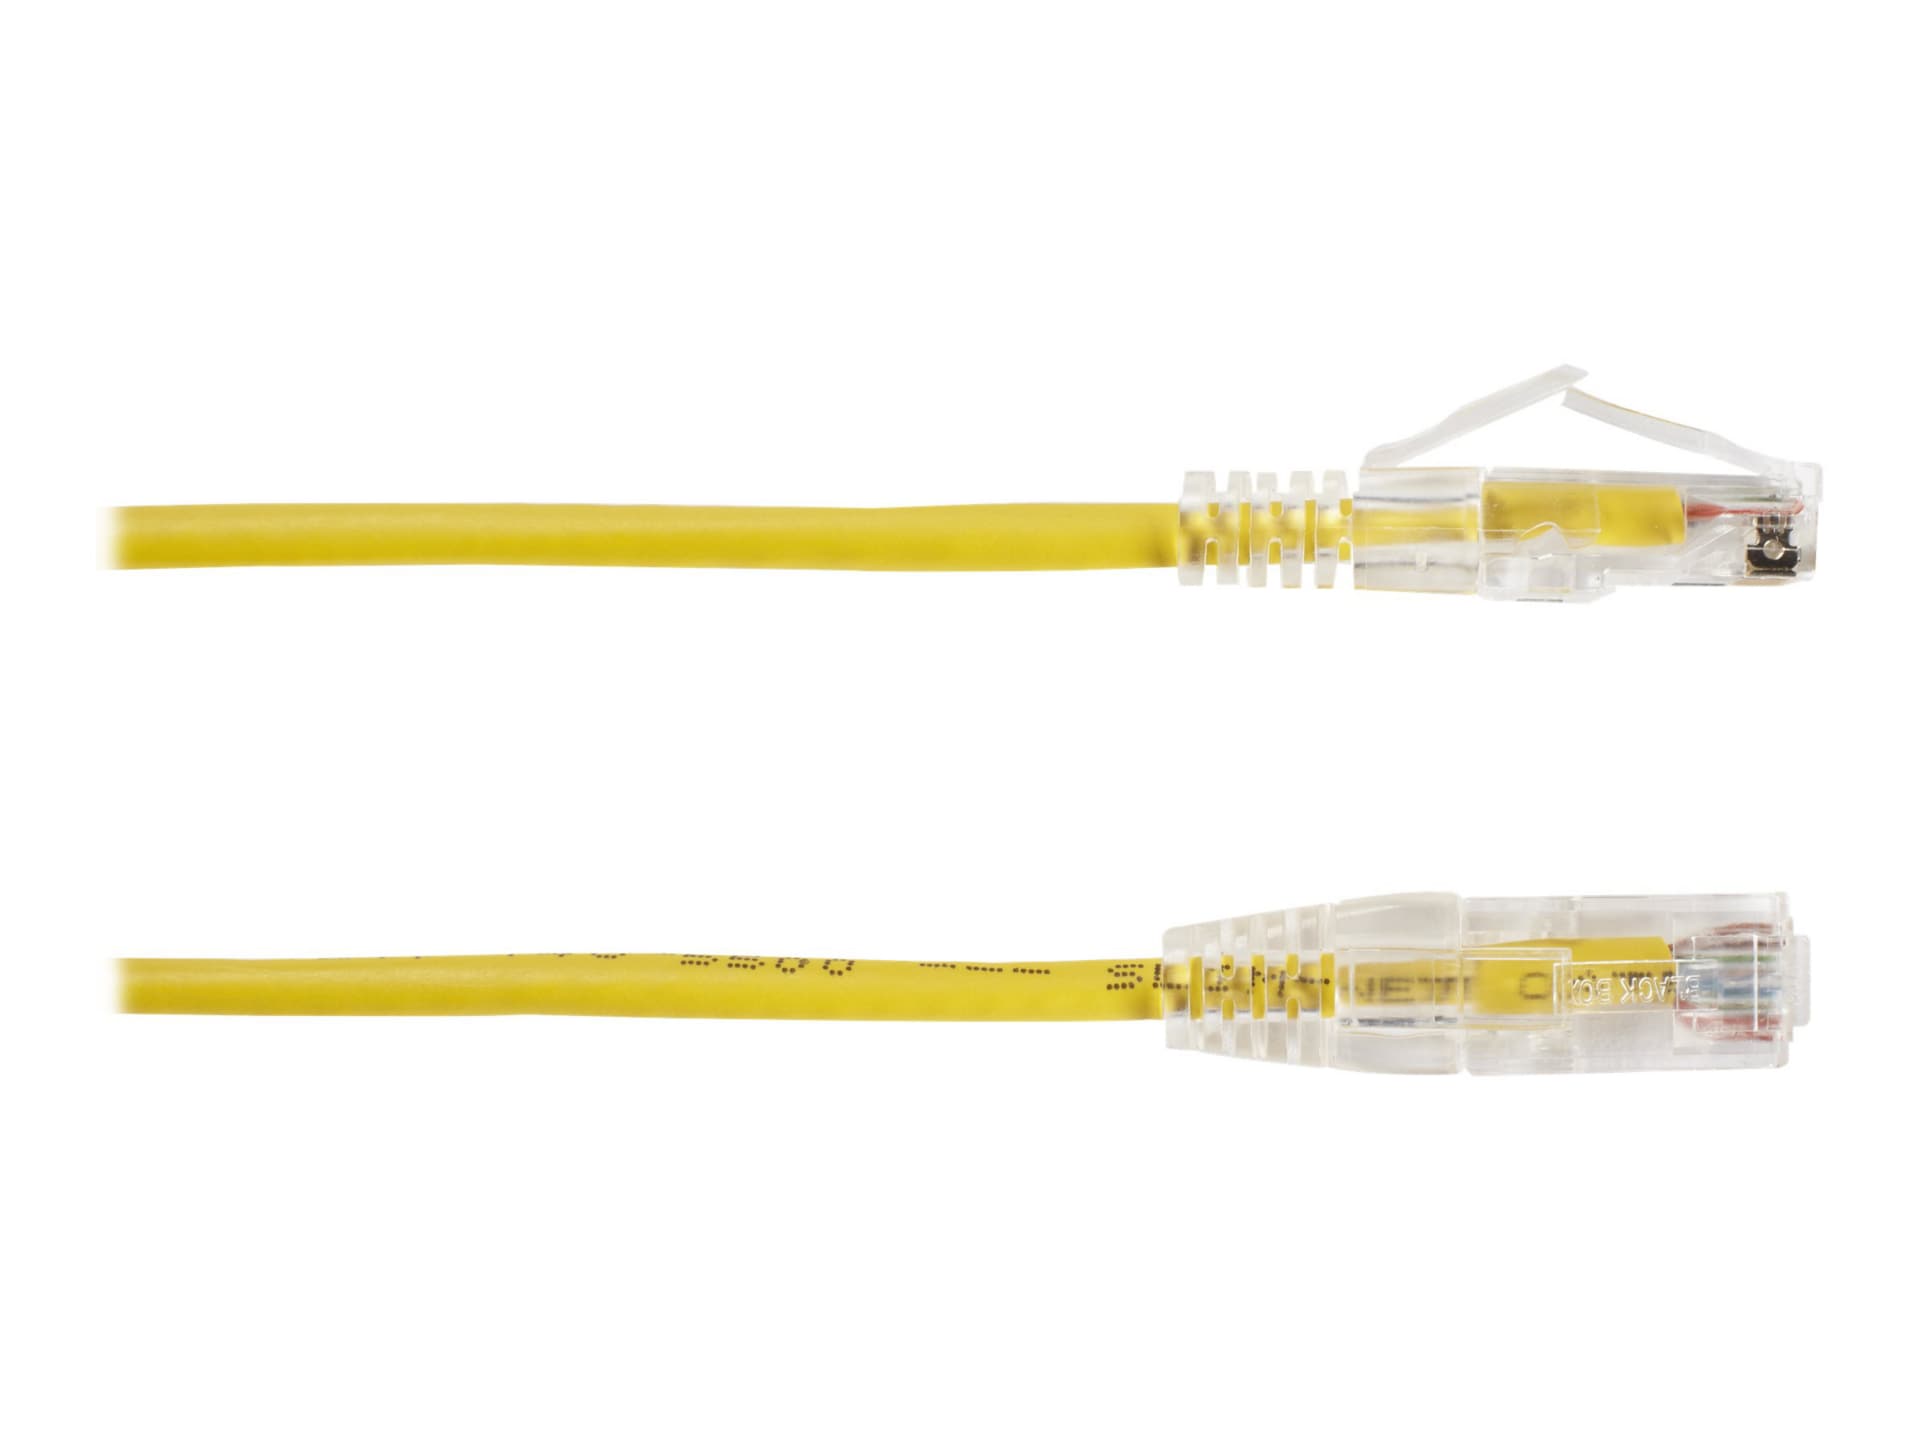 Black Box Slim-Net patch cable - 20 ft - yellow